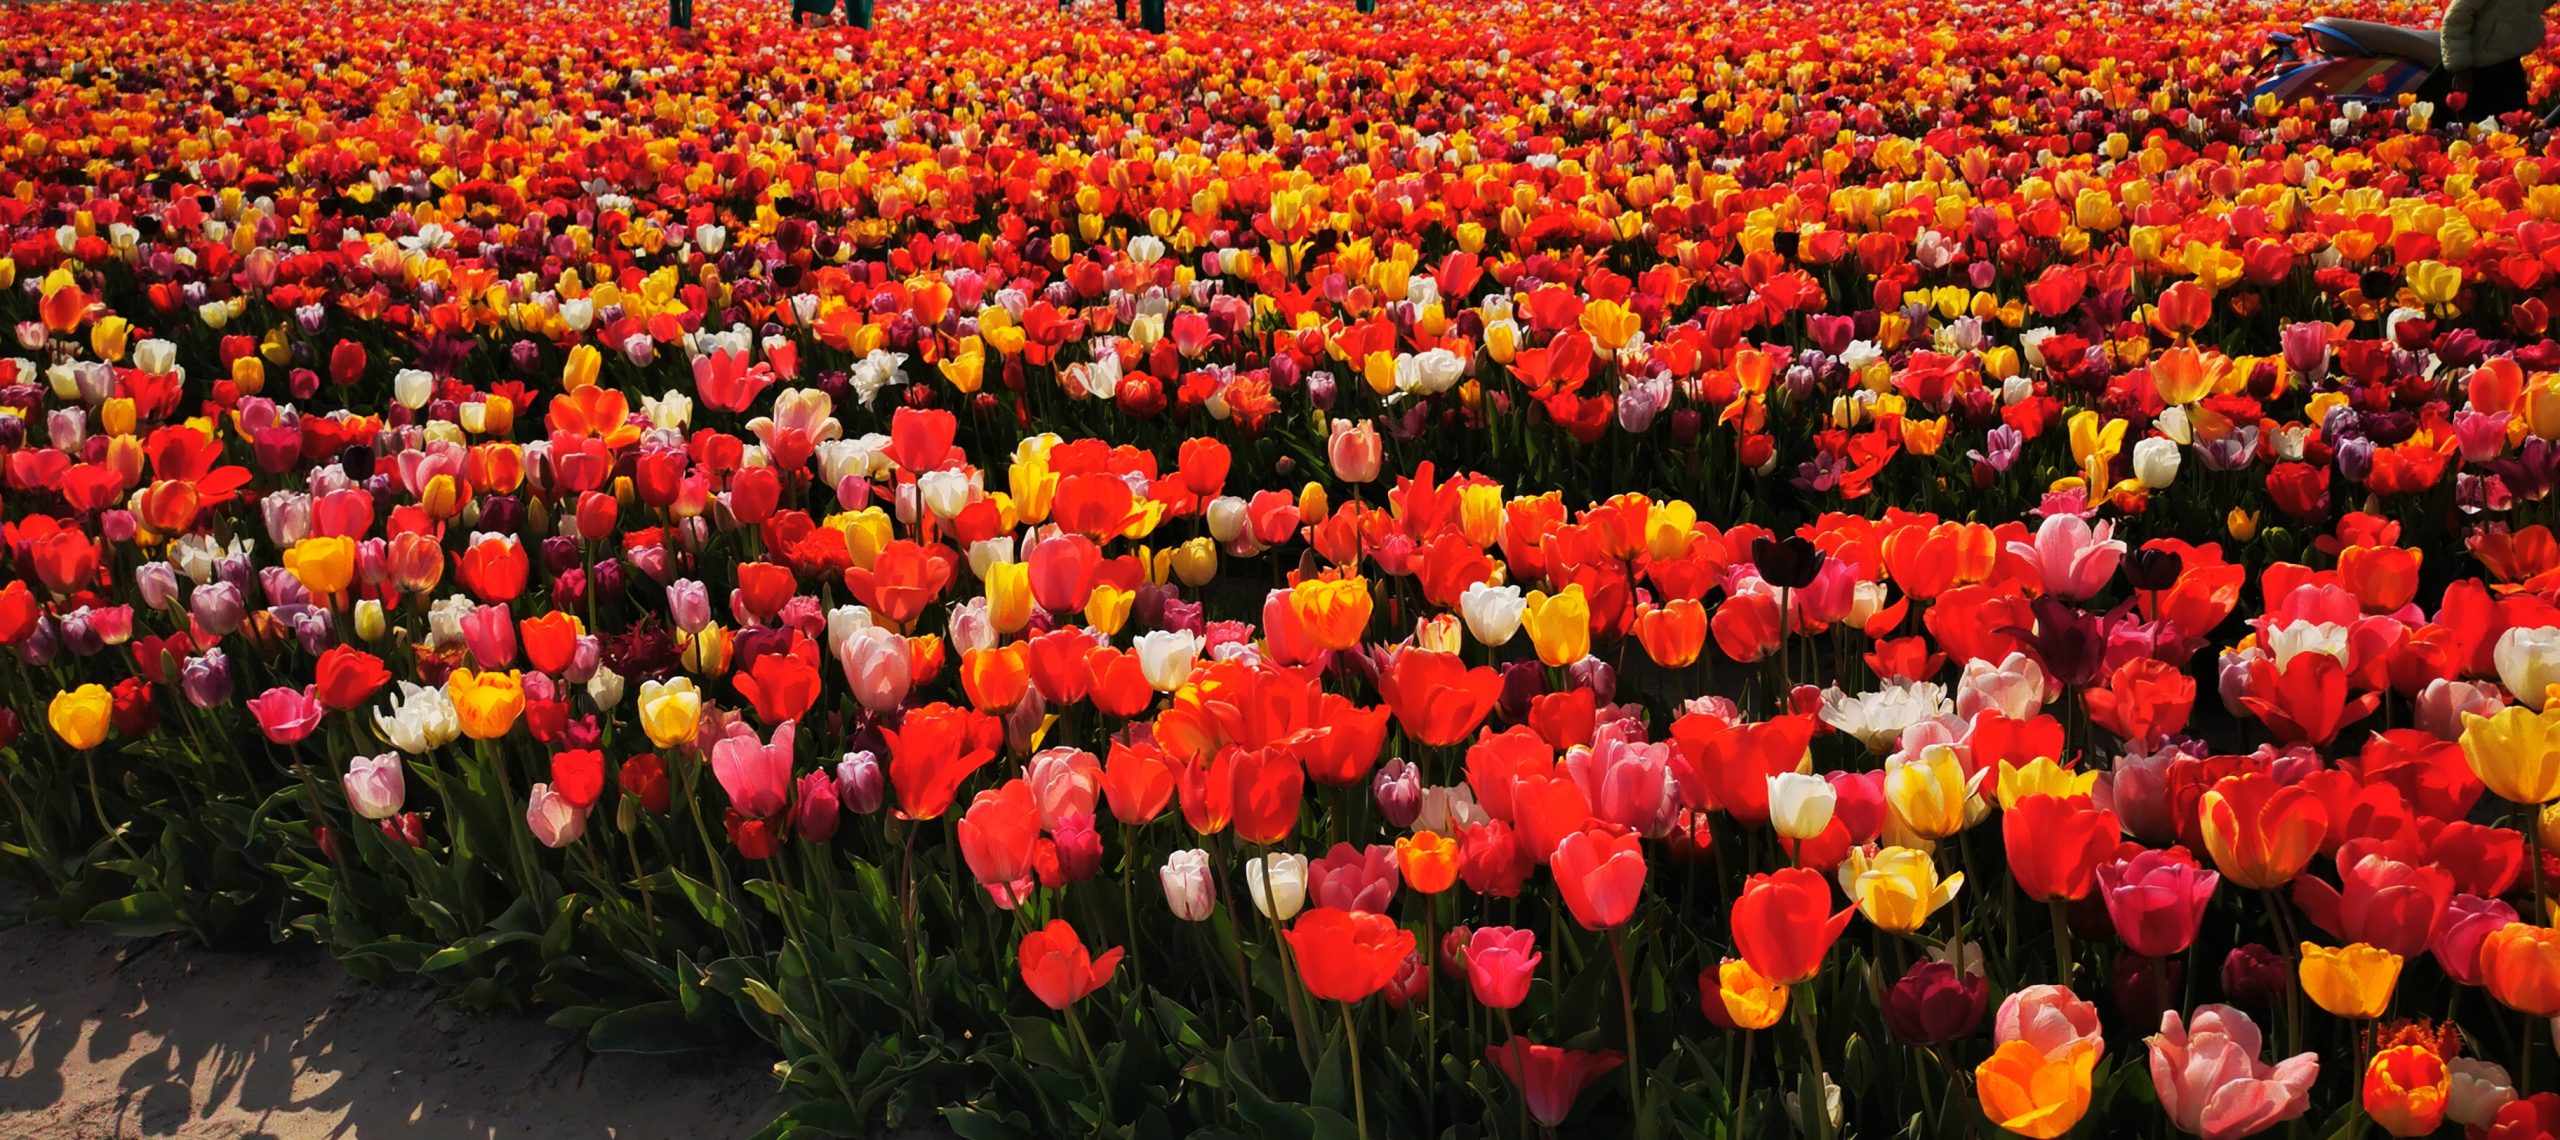 A field of red, pink, white and yellow tulips. 